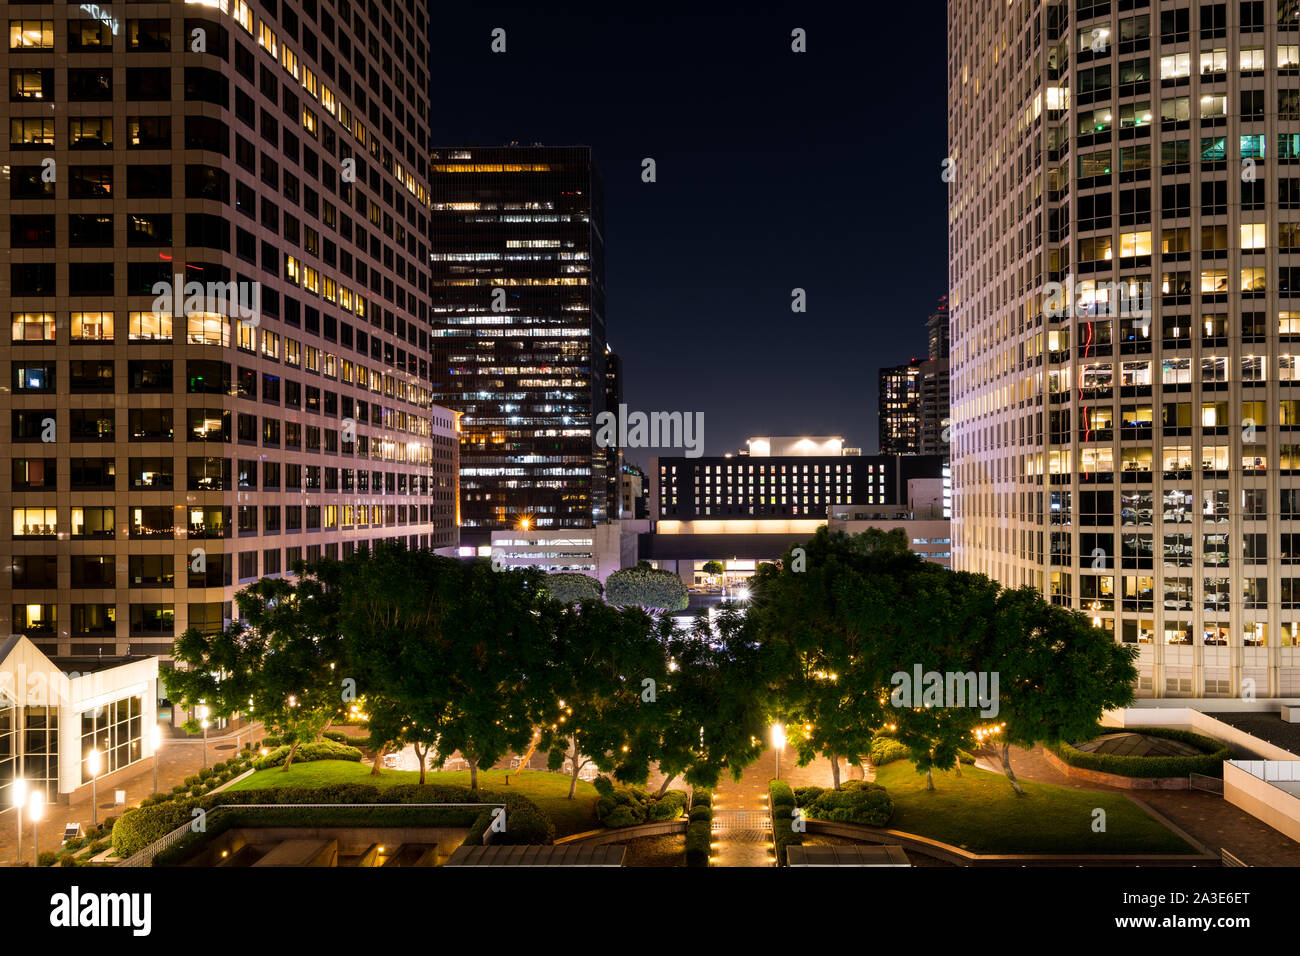 Urban cityscape scene of high rise buildings above a green urban park in downtown Los Angeles, California Stock Photo